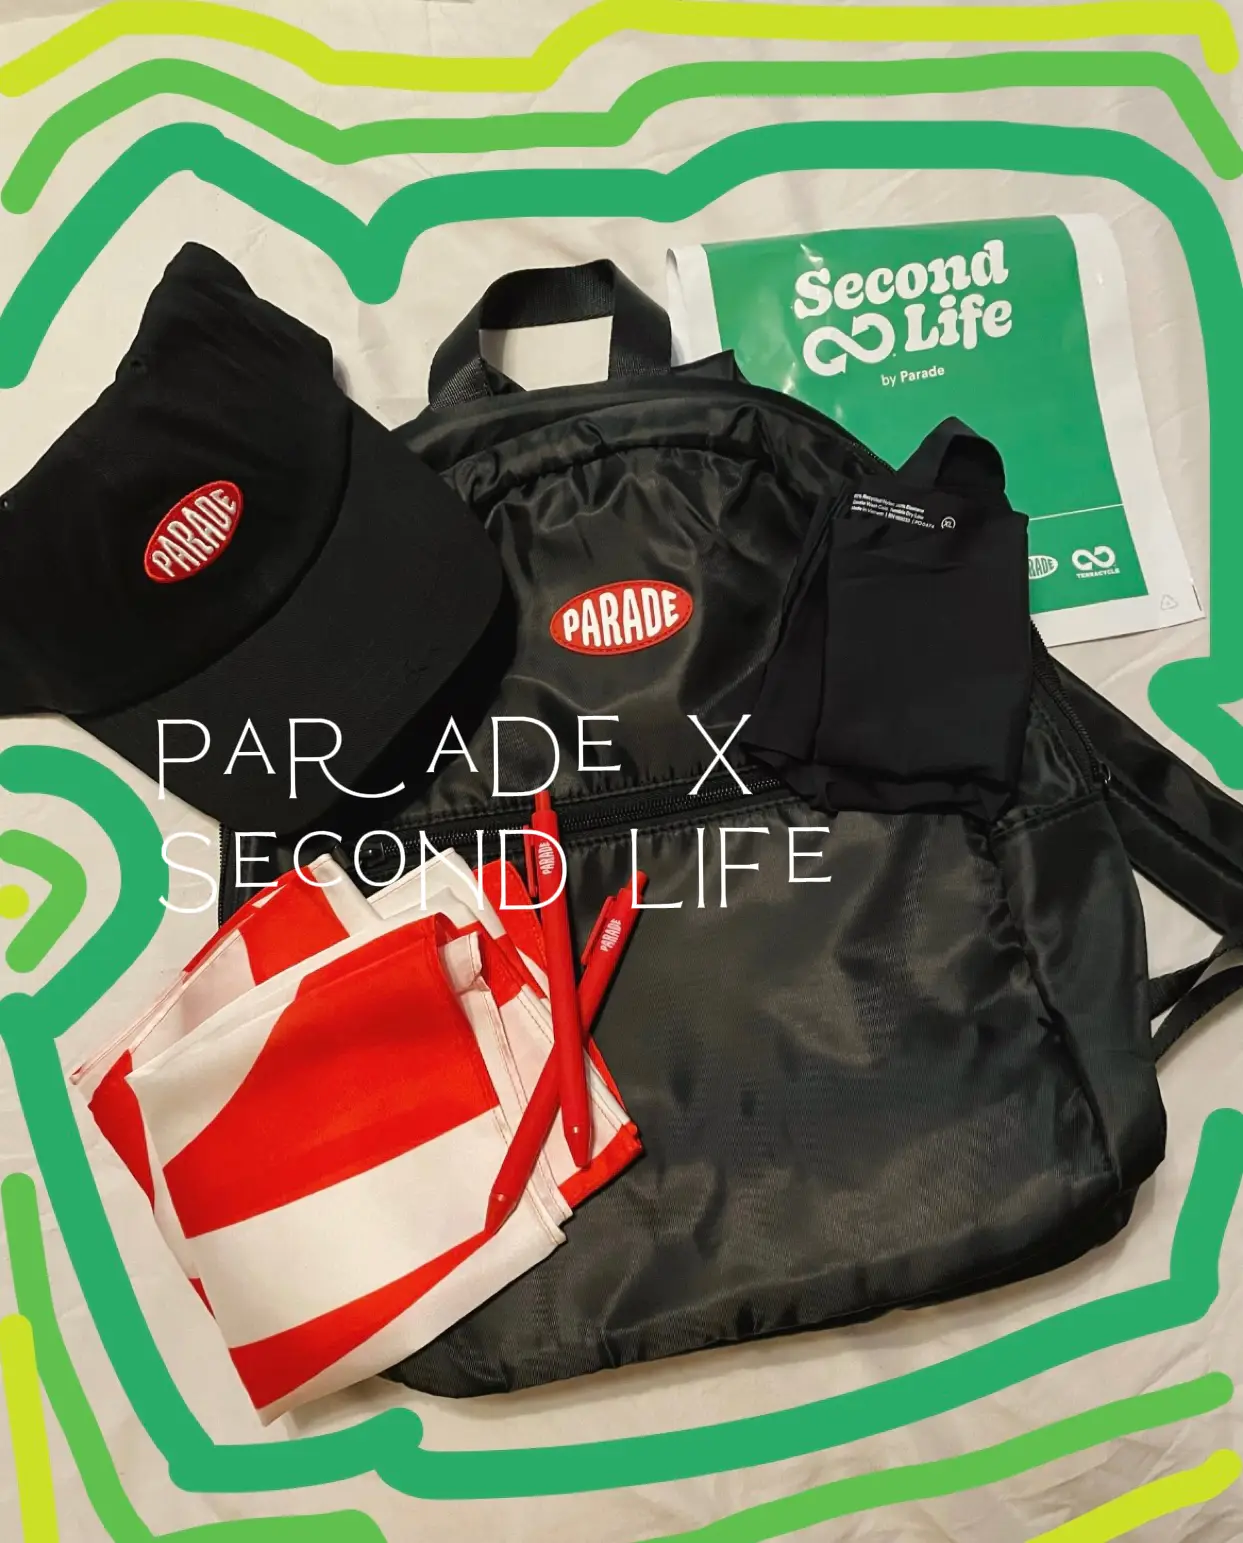 Second Life by Parade is back! It's our underwear recycling program keeps  your old pairs out of landfills and turns them into something…